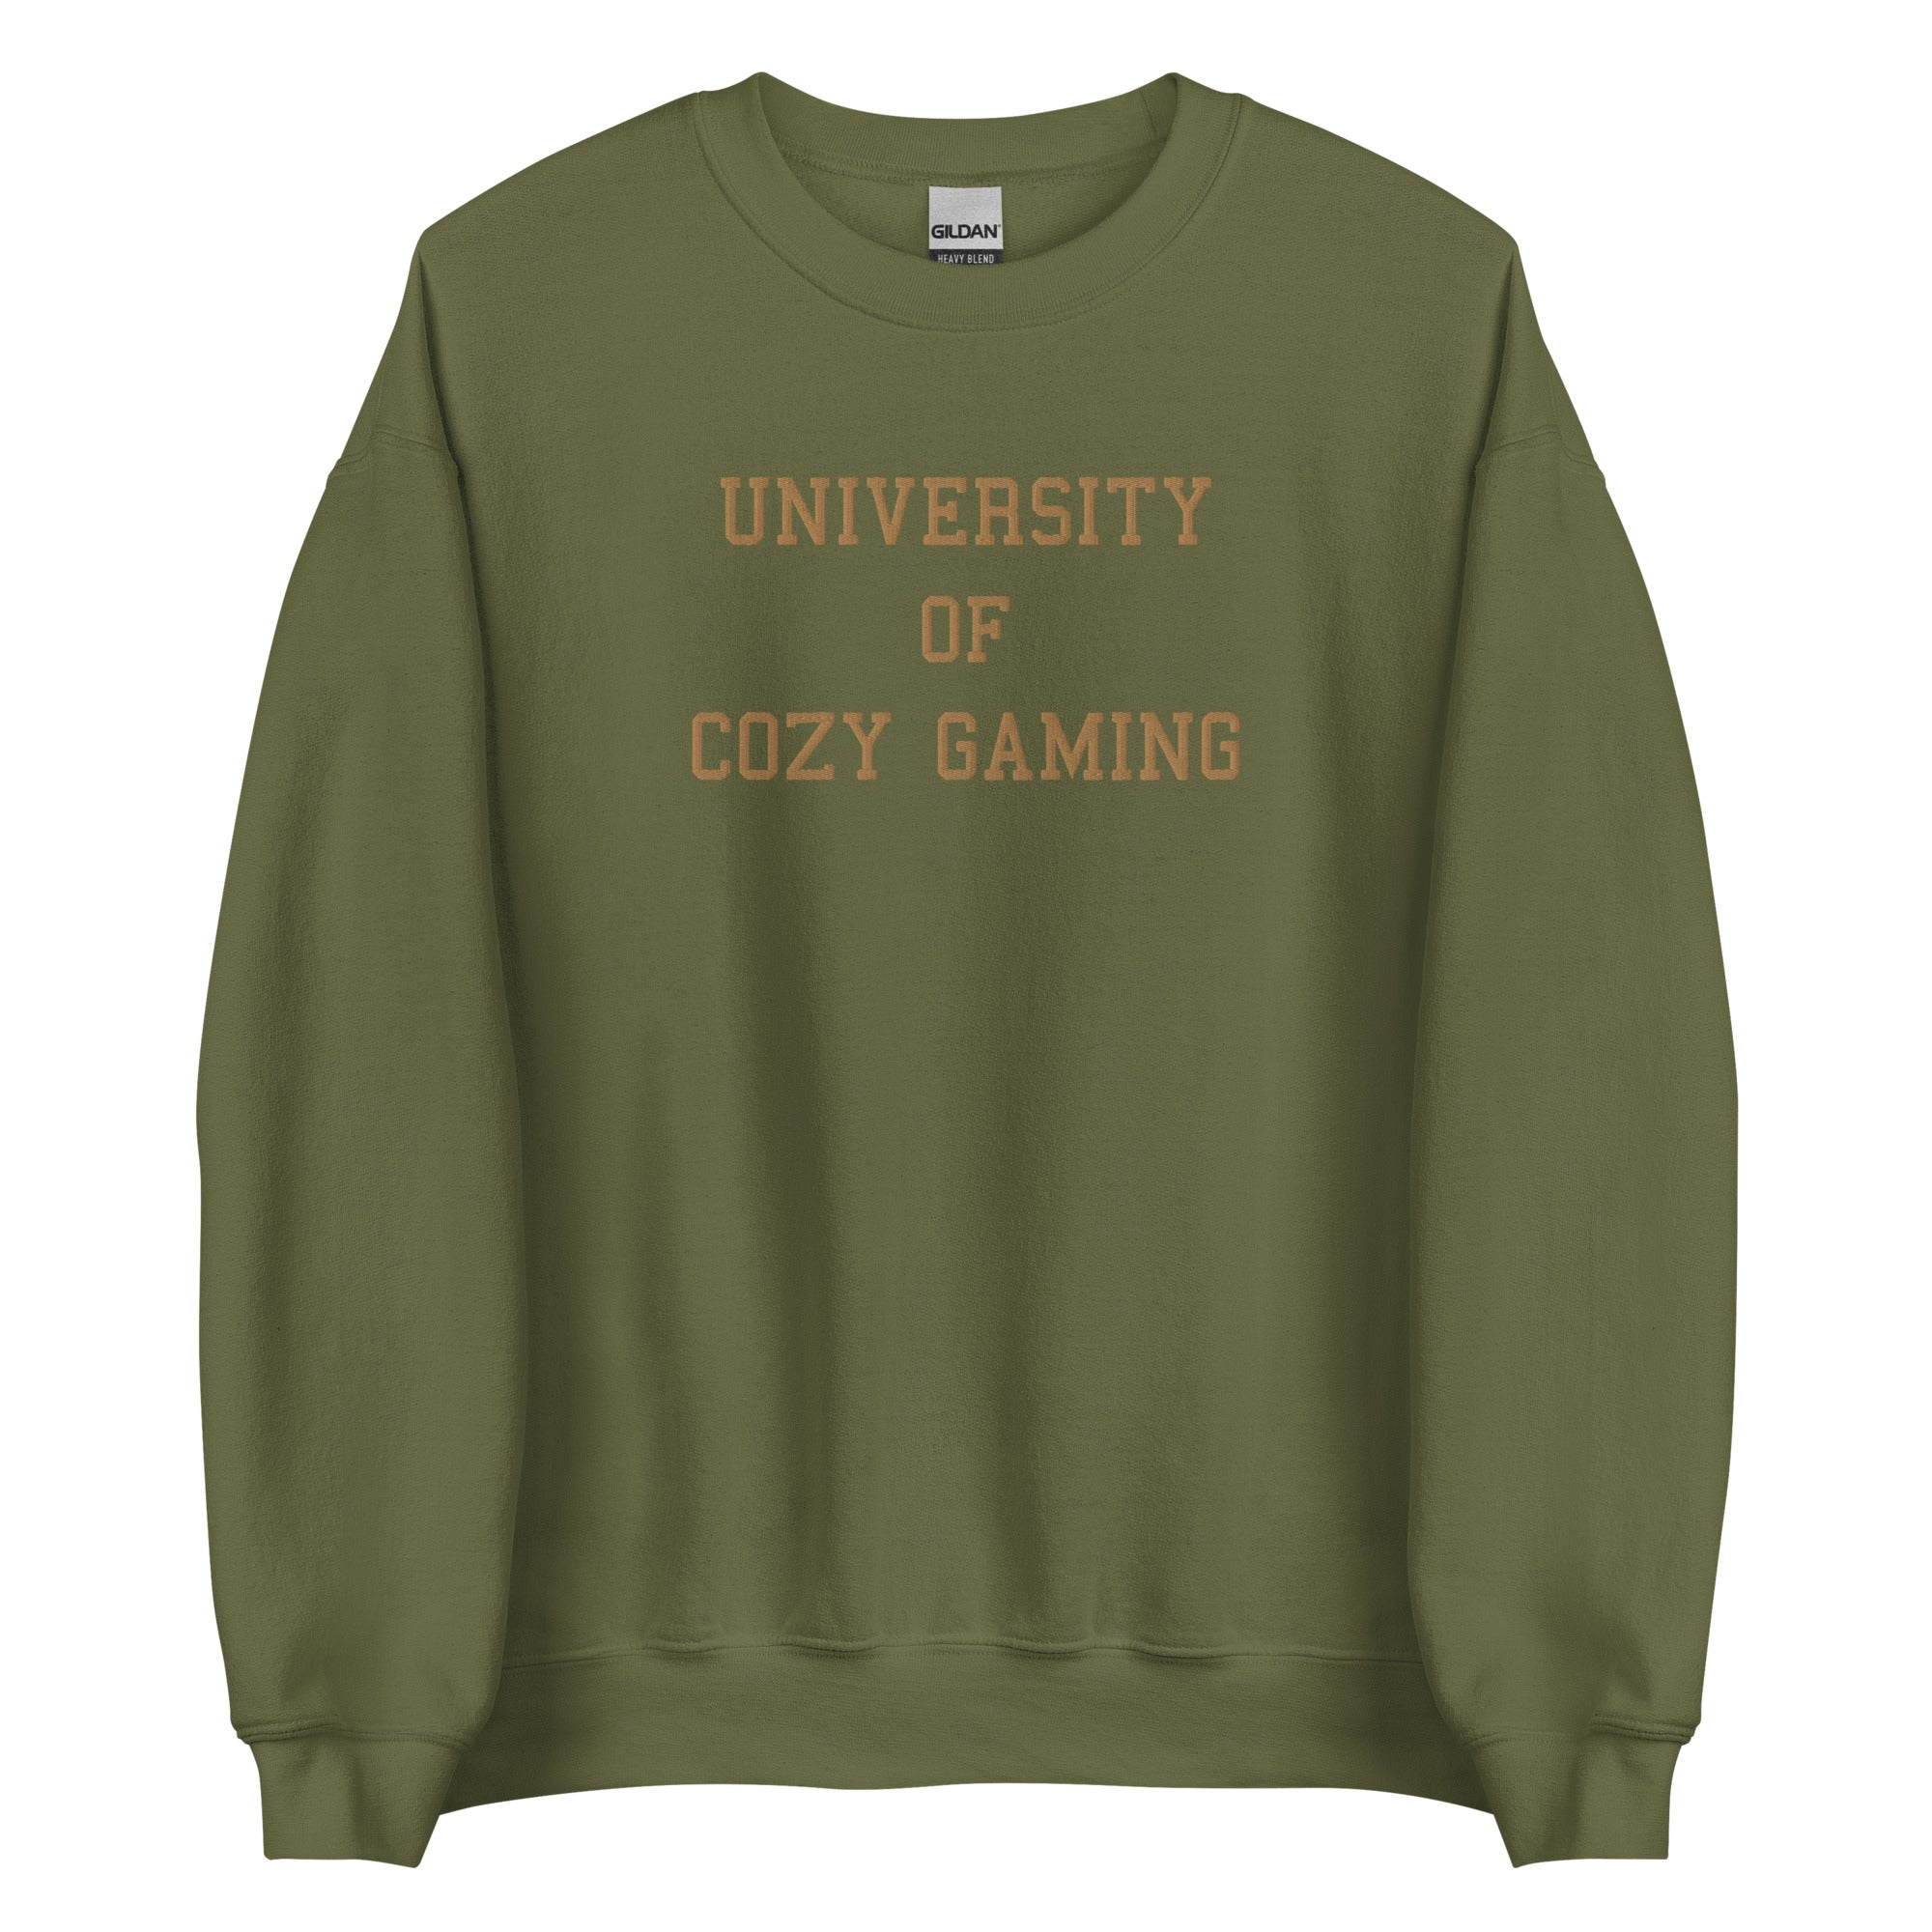 University of Cozy Gaming | Embroidered Unisex Sweatshirt | Coy Gamer Threads and Thistles Inventory Military Green S 